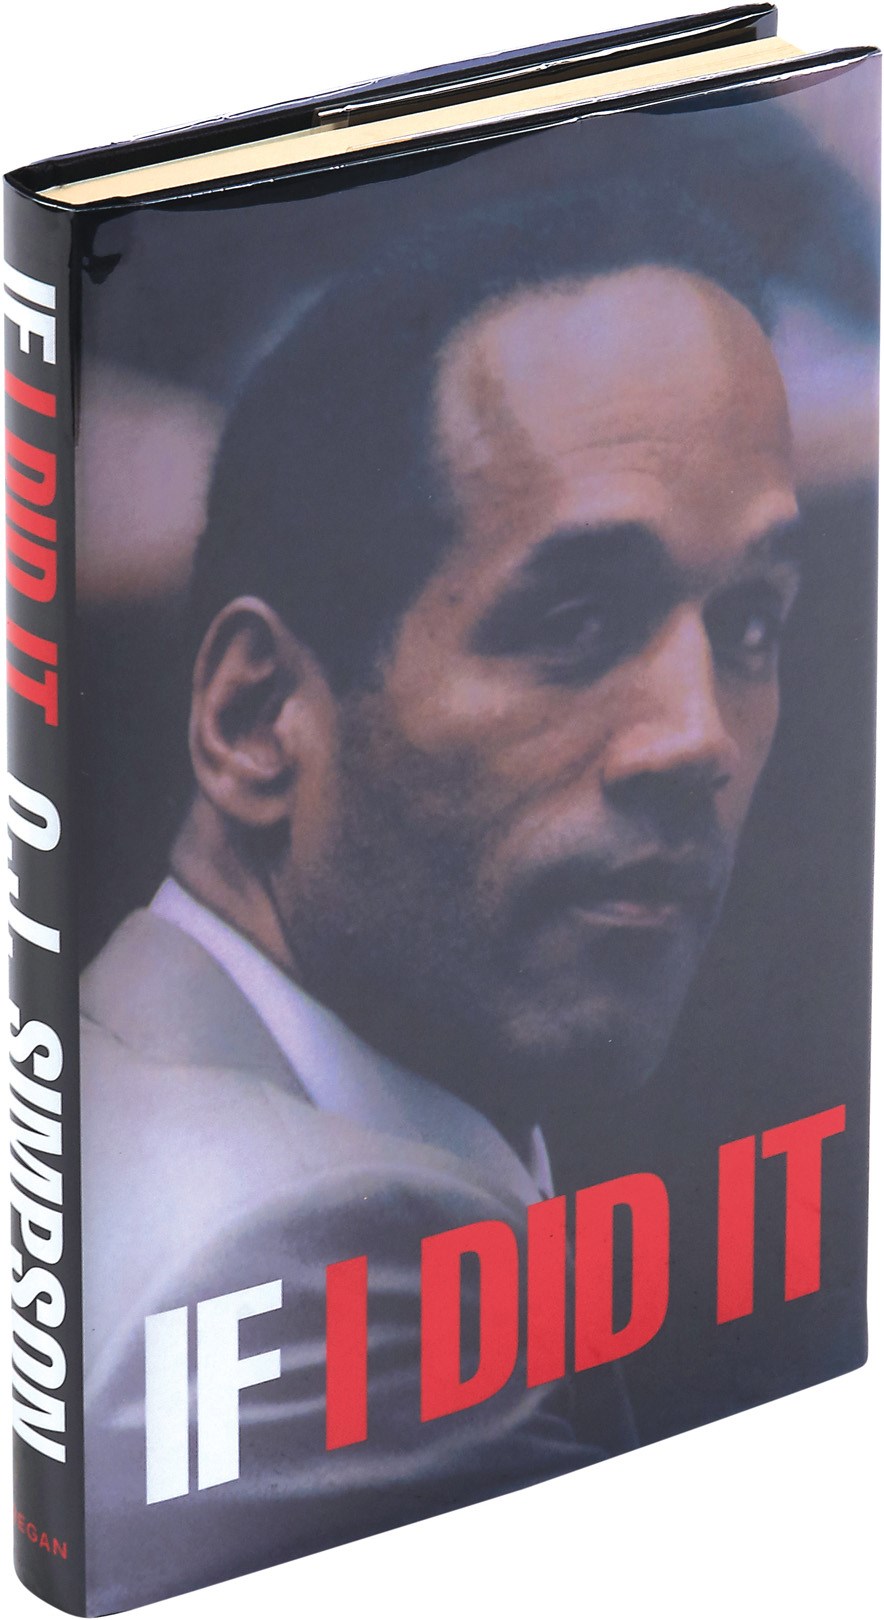 2006 "If I Did It" First Edition by OJ Simpson